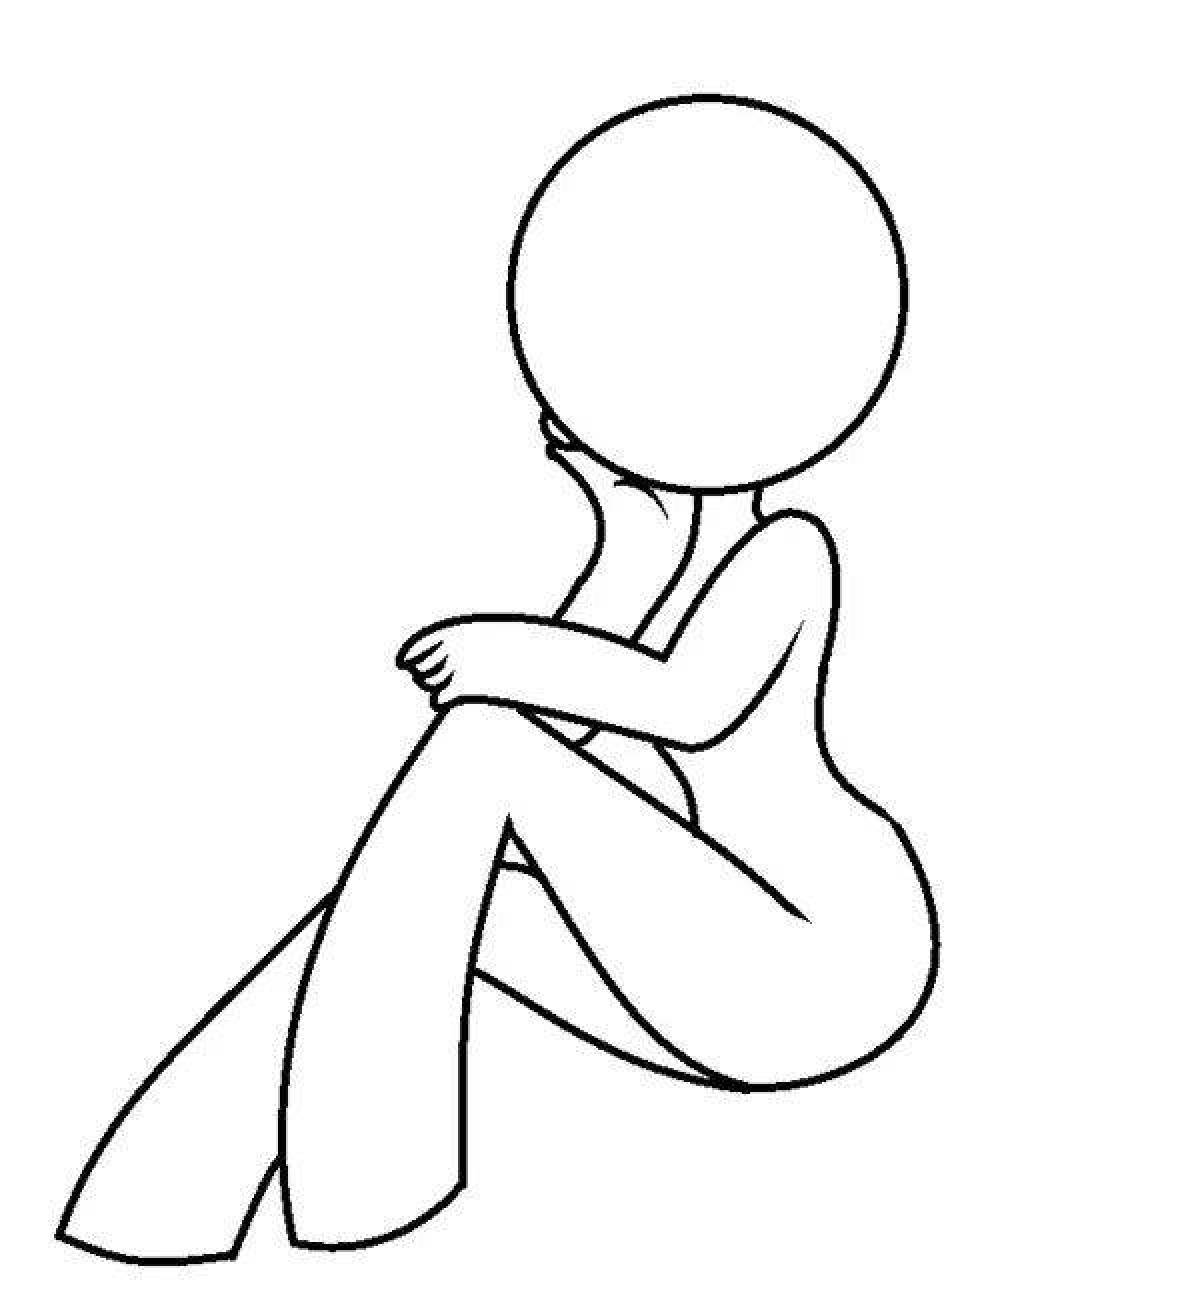 Fun poses for coloring pages